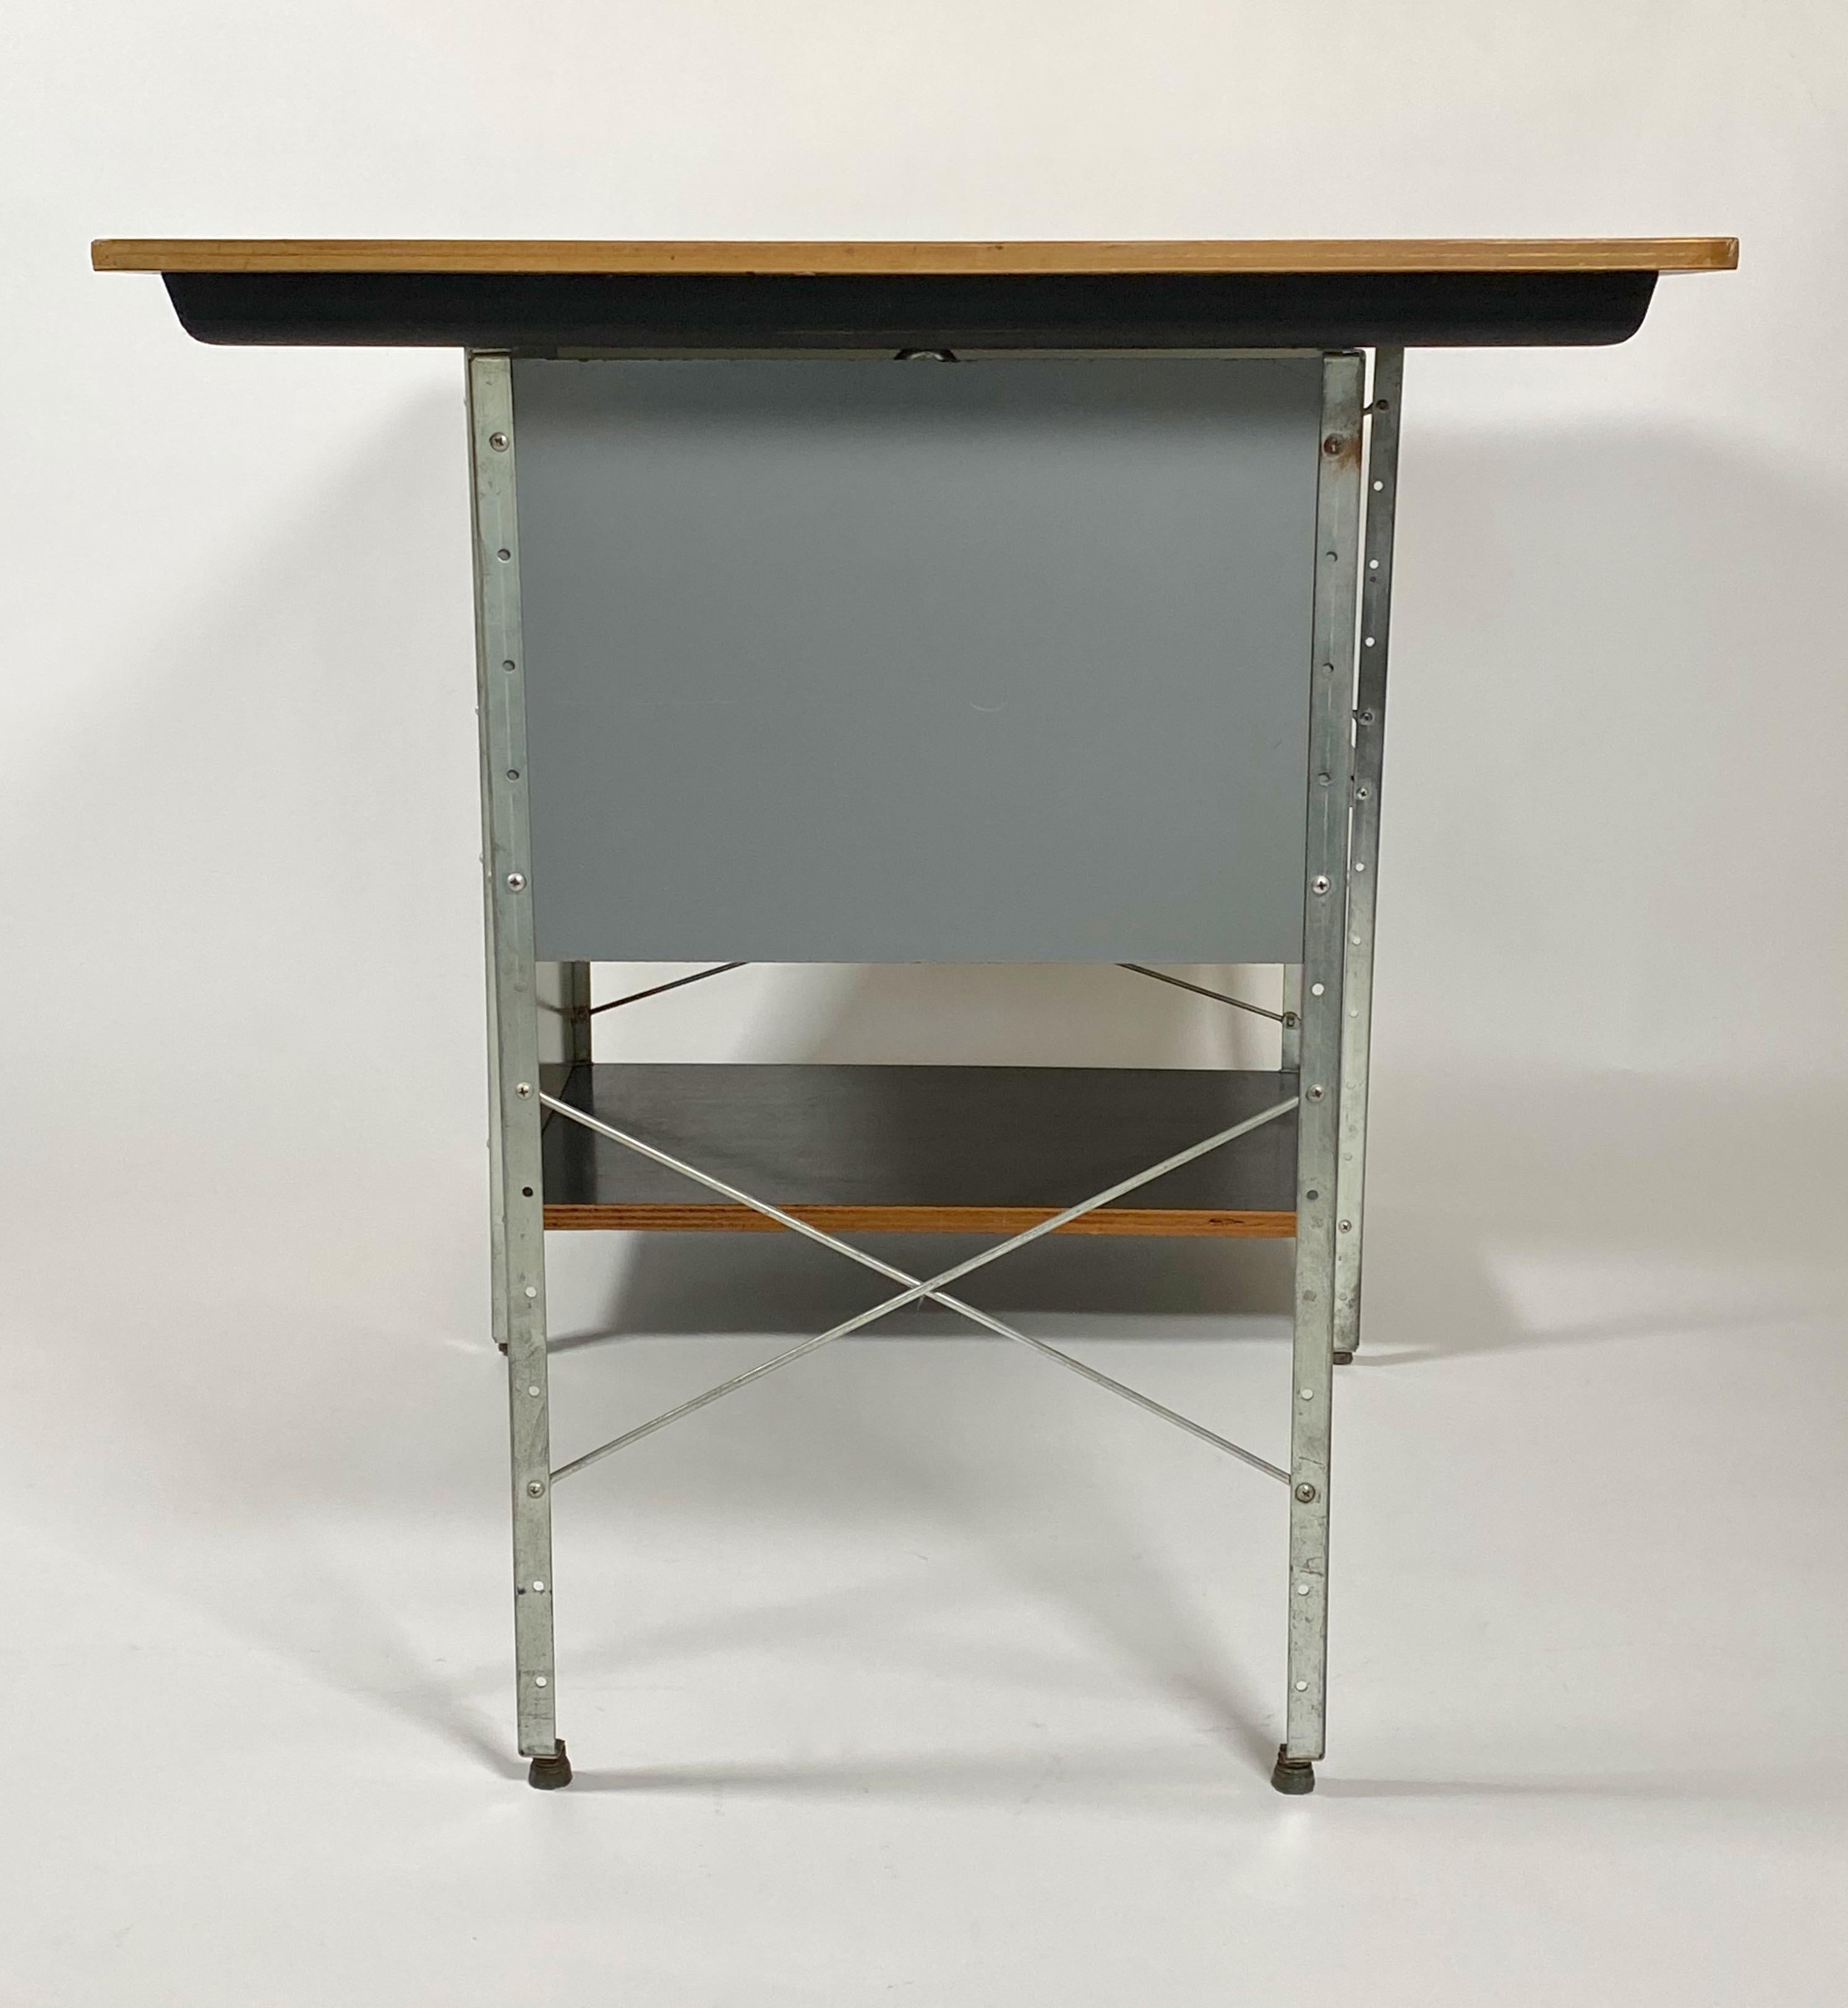 1st Generation ESU D-10-N Desk by Charles and Ray Eames 1